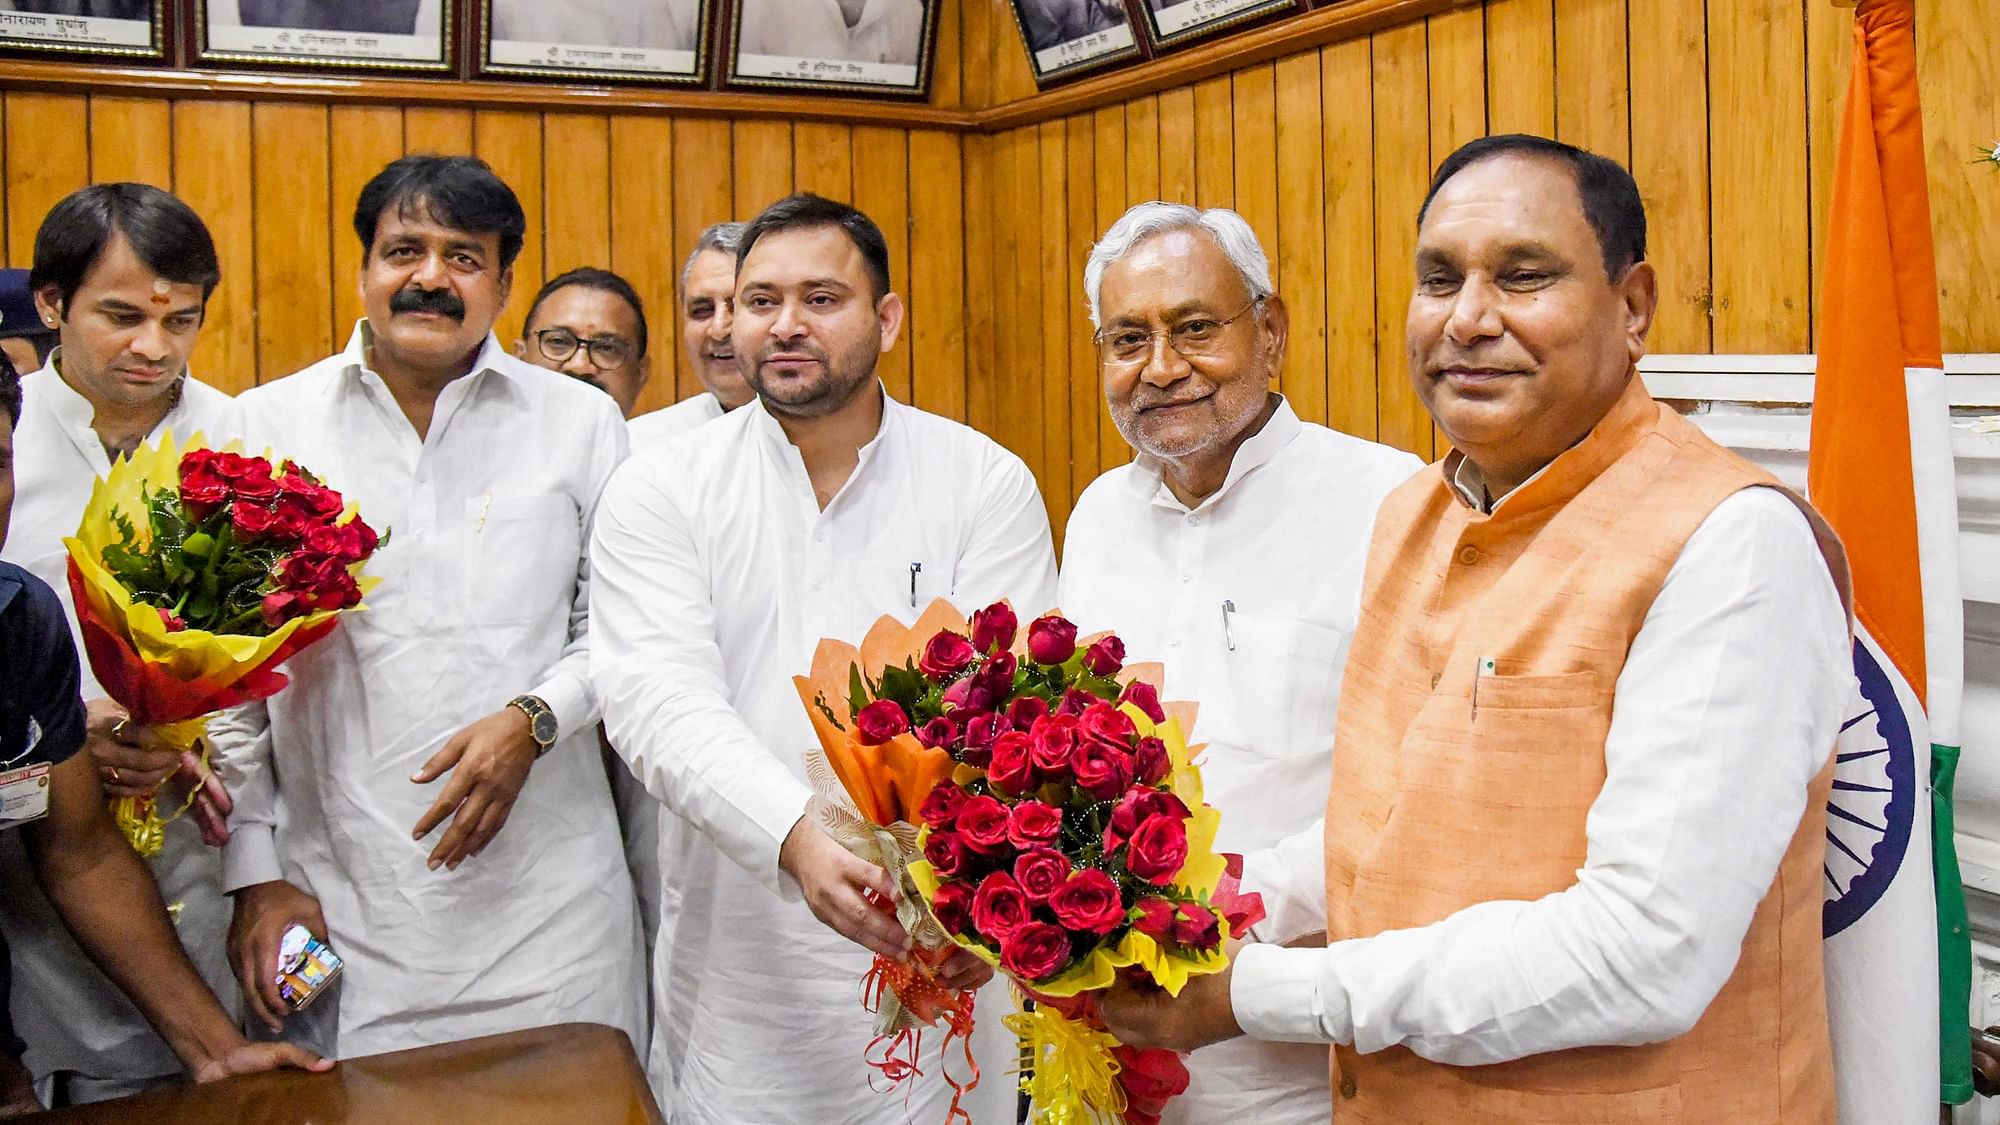 <div class="paragraphs"><p>The Bihar Chief Minister <a href="https://www.thequint.com/topic/nitish-kumar">Nitish Kumar</a>-led newly formed Bihar government proved its majority in the floor test held on Wednesday, 24 August, with the support of 160 MLAs.</p></div>